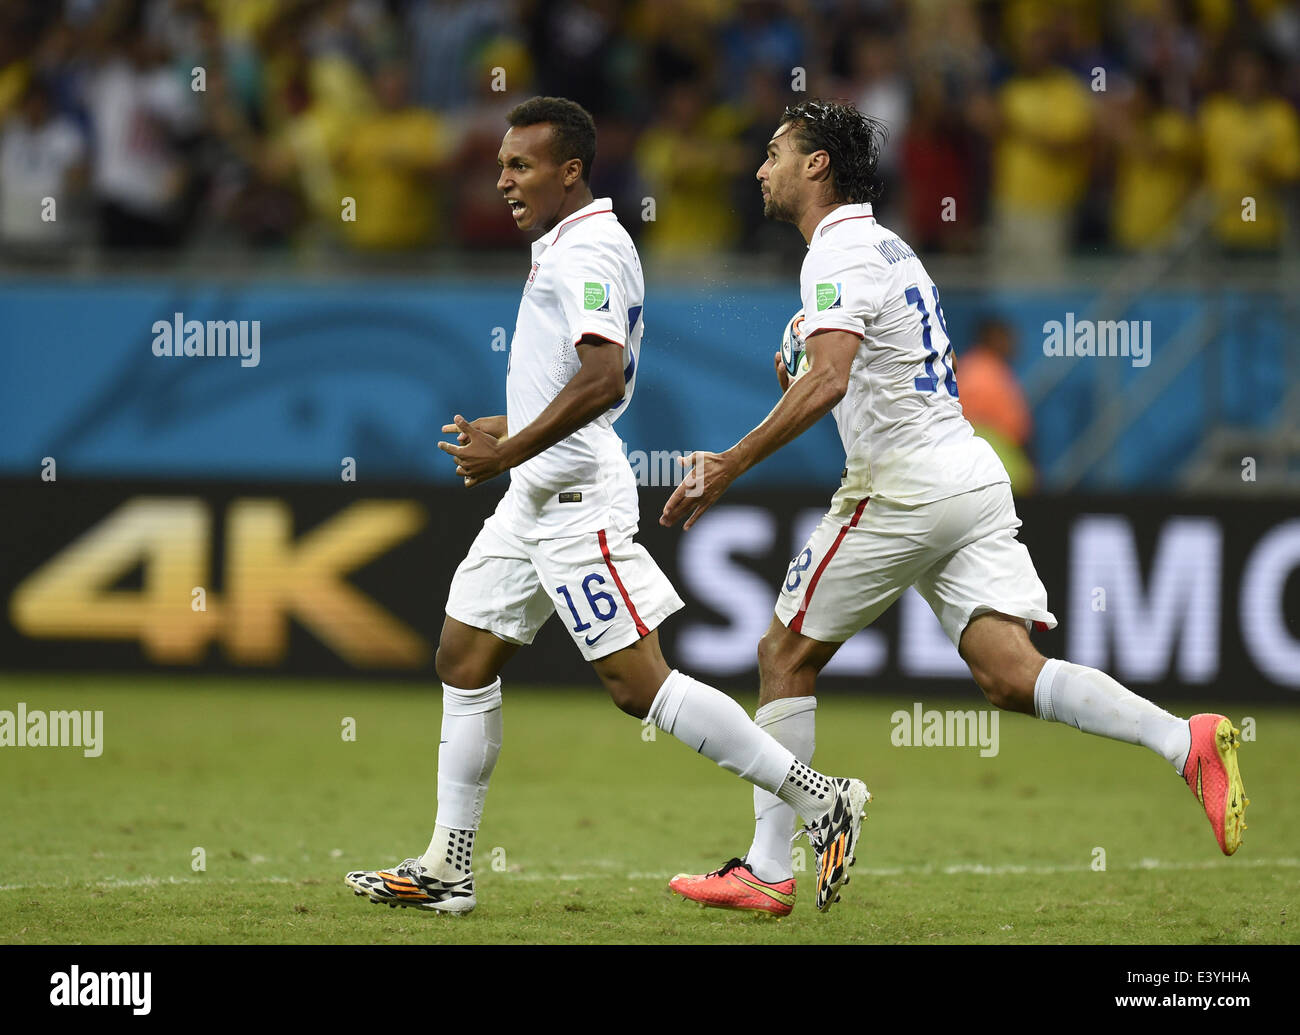 Salvador, Brazil. 1st July, 2014. Julian Green (L) and Chris Wondolowski of the U.S. celebrates the goal during the extra time of a Round of 16 match between Belgium and the U.S. of 2014 FIFA World Cup at the Arena Fonte Nova Stadium in Salvador, Brazil, on July 1, 2014. Belgium won 2-1 over the U.S. after 120 minutes and qualified for quarter-finals on Tuesday. Credit:  Yang Lei/Xinhua/Alamy Live News Stock Photo